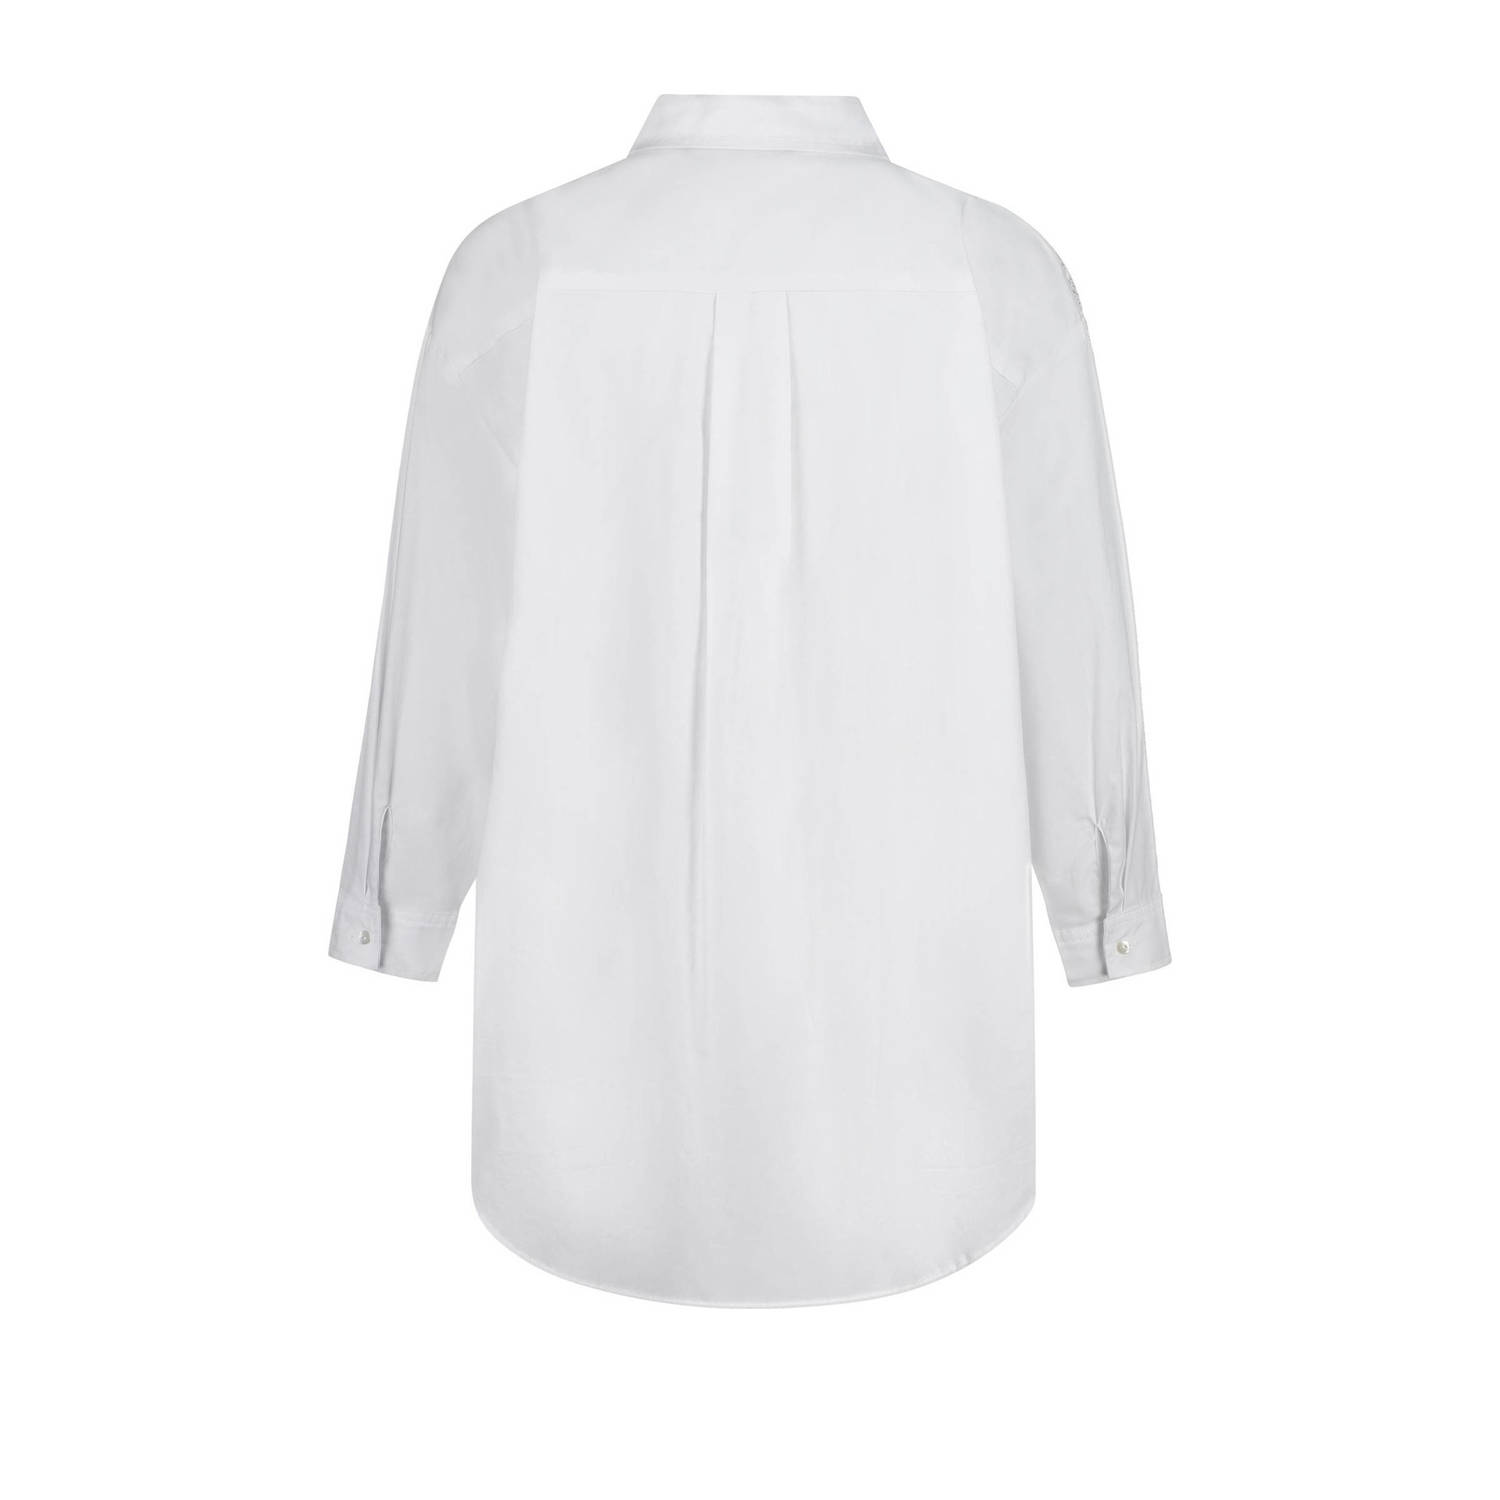 Expresso geweven blouse wit